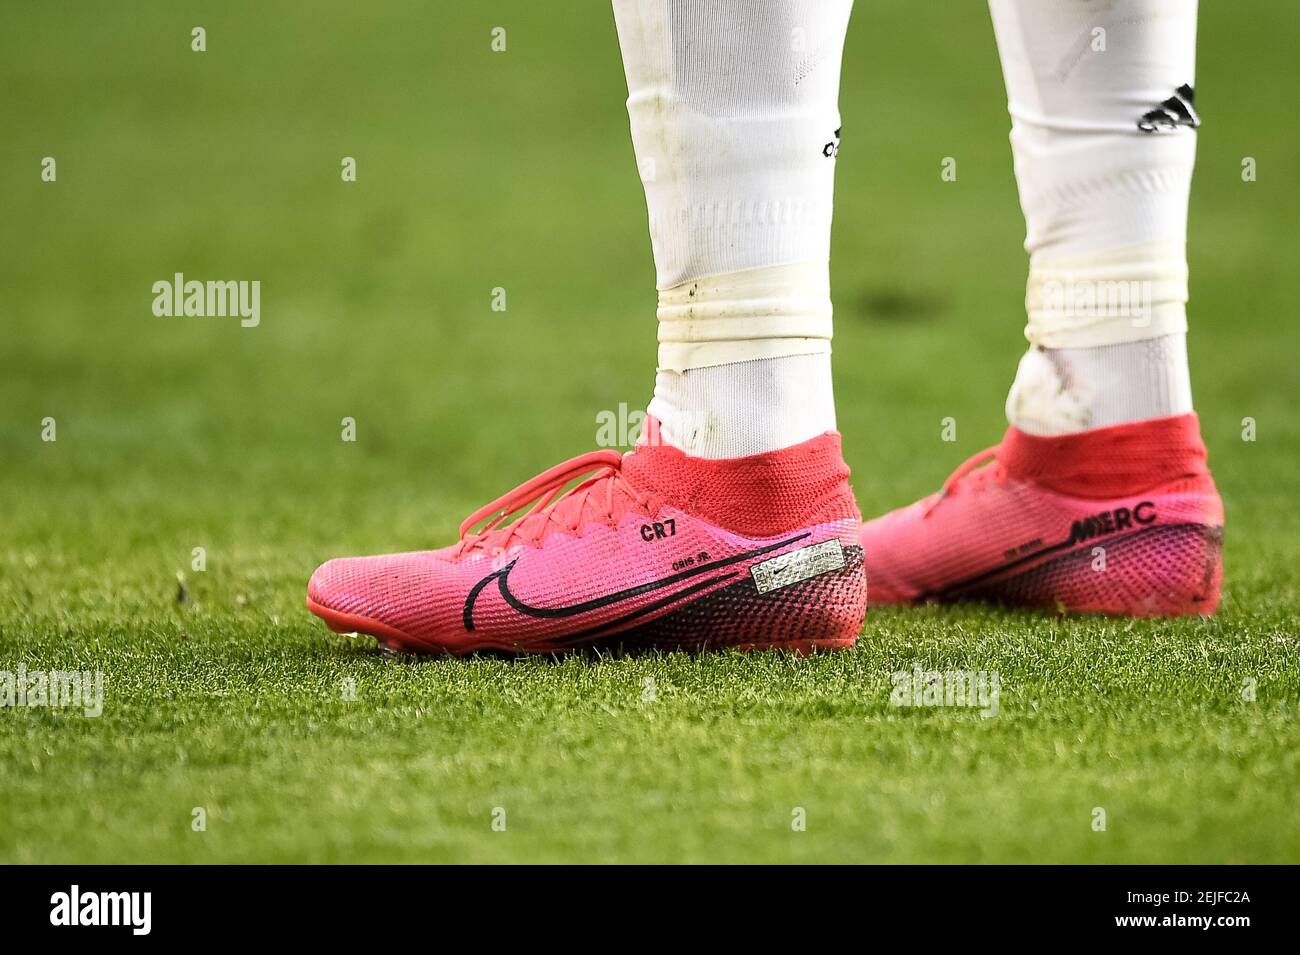 TURIN, ITALY - February 02, 2020: Nike boots of Cristiano Ronaldo of  Juventus FC are pictured during